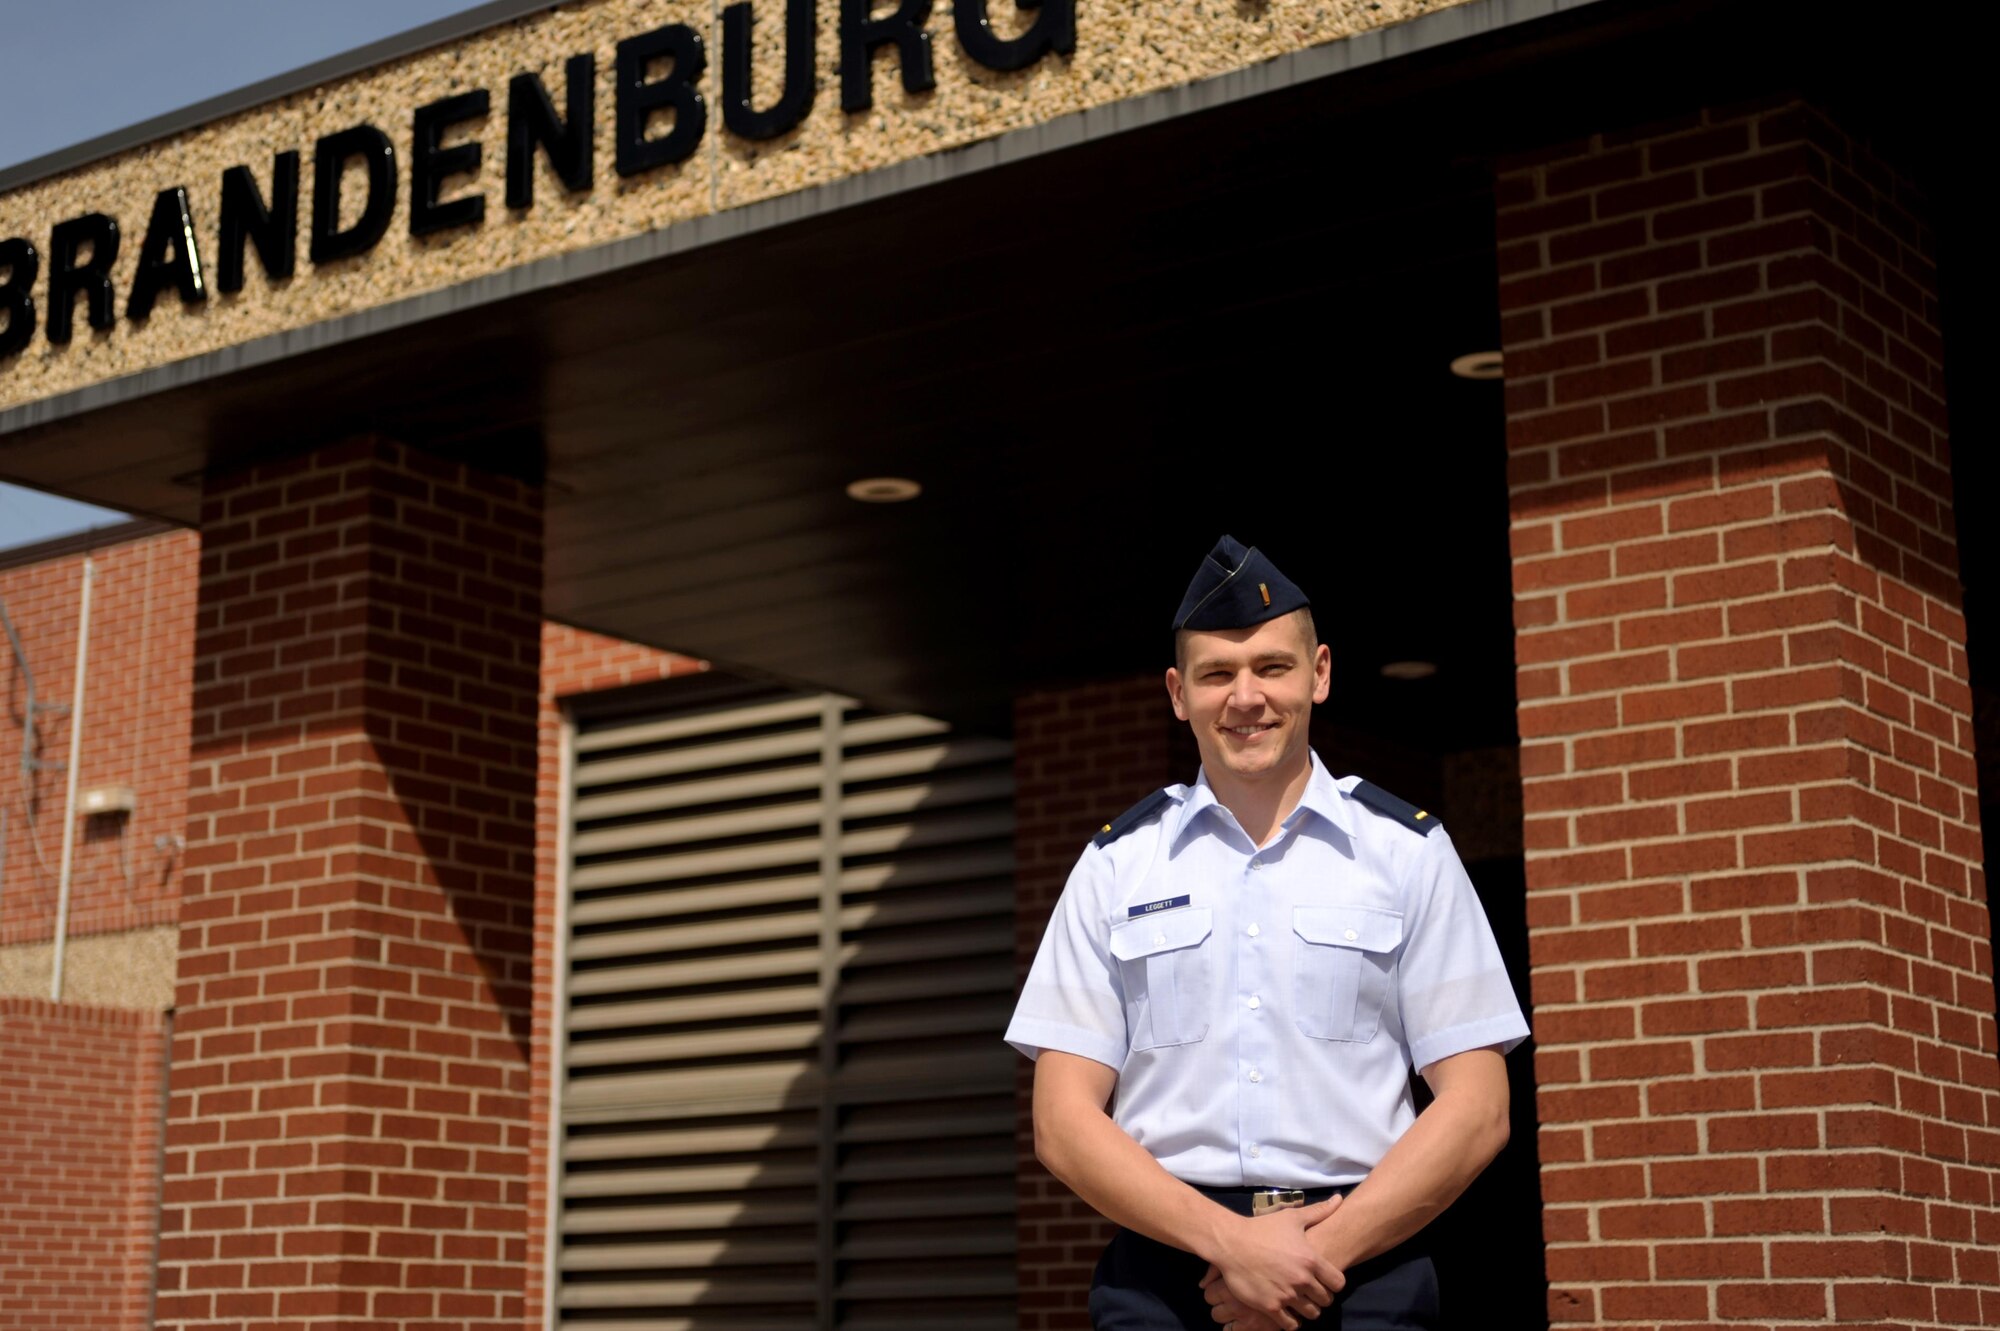 U.S. Air Force 2nd Lt. Kyle A. Leggett, 315th Training Squadron student, smiles for a portrait in front of Brandenburg Hall on Goodfellow Air Force Base, Texas, March 4, 2016. Leggett is the Goodfellow Student of the Month spotlight for February, a series highlighting Team Goodfellow students. (U.S. Air Force photo by Senior Airman Joshua Edwards/Released)